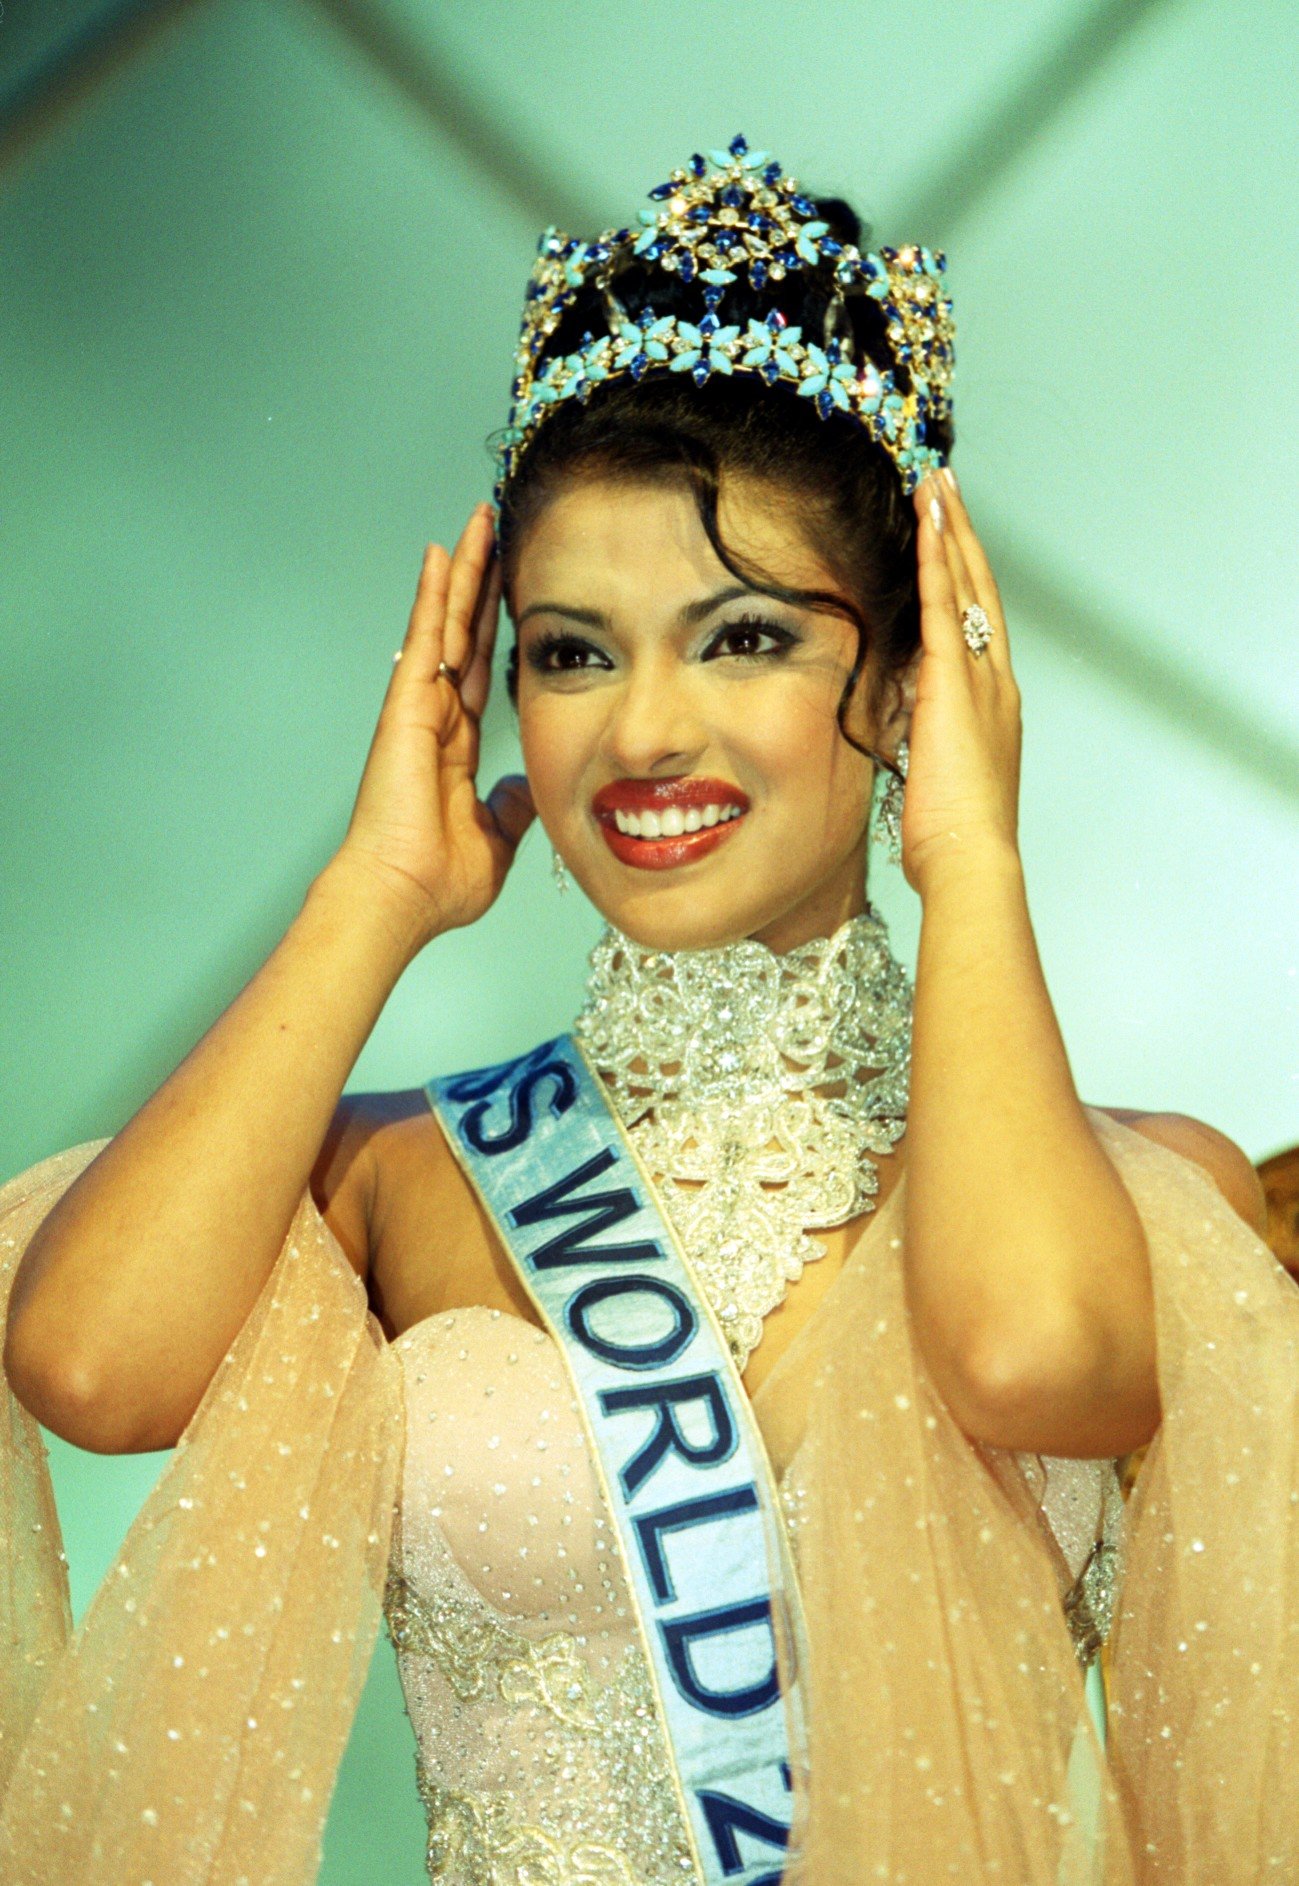 Priyanka Chopra during her crowning moment in Miss World 2002. | Photo: Getty Images